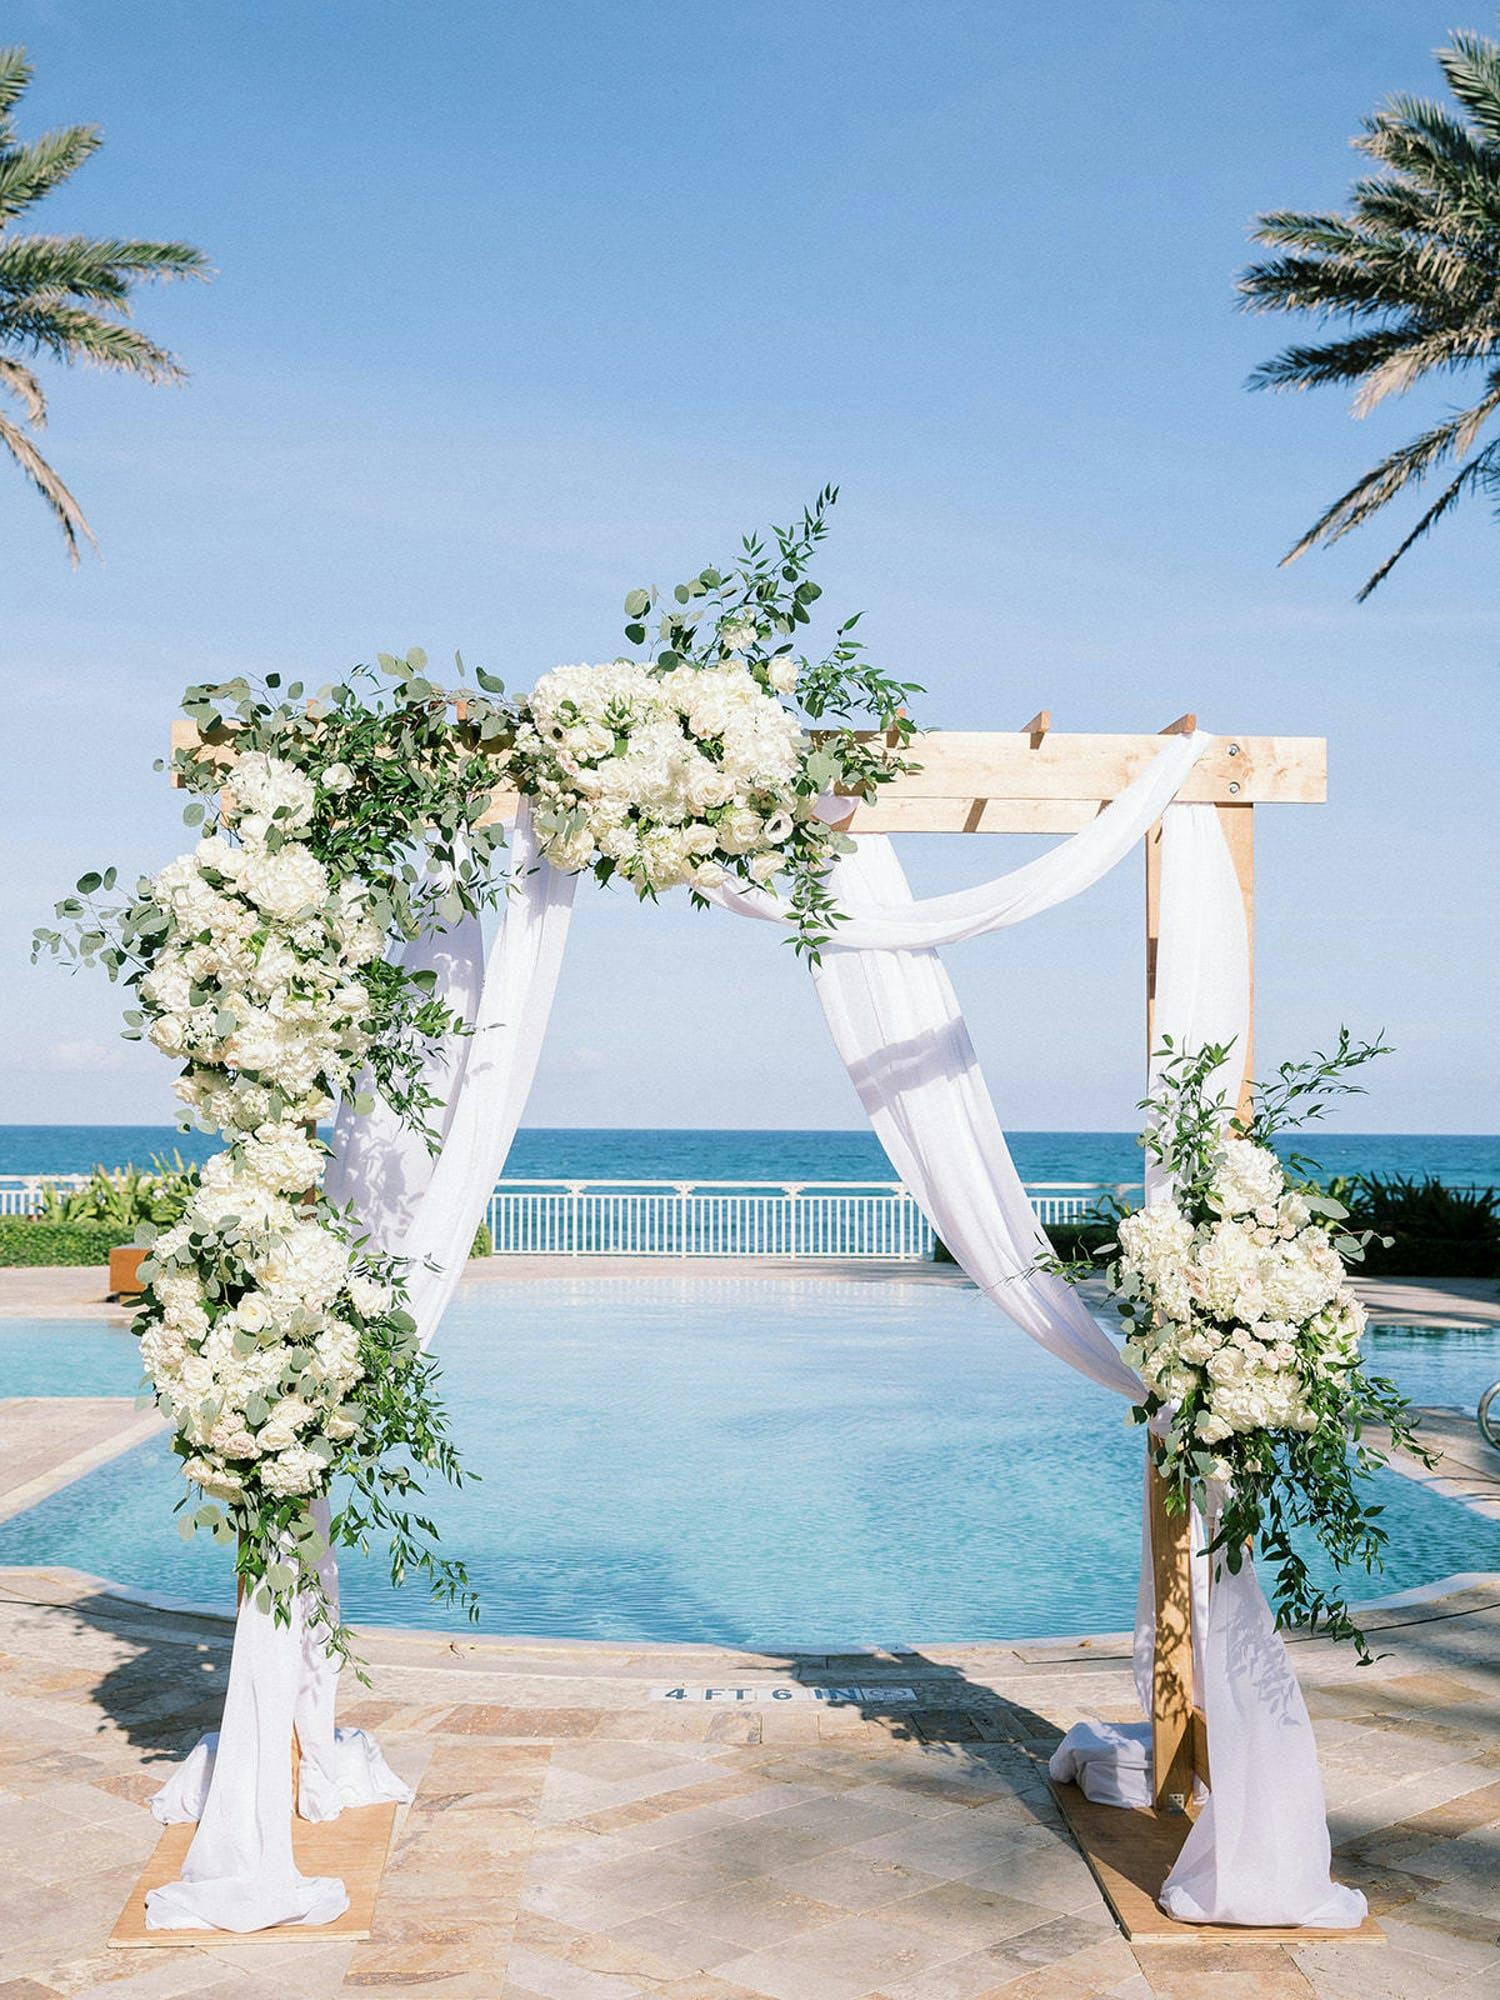 Outdoor wooden wedding arch with white drapery and white flowers and greenery with pool and ocean in backdrop | PartySlate